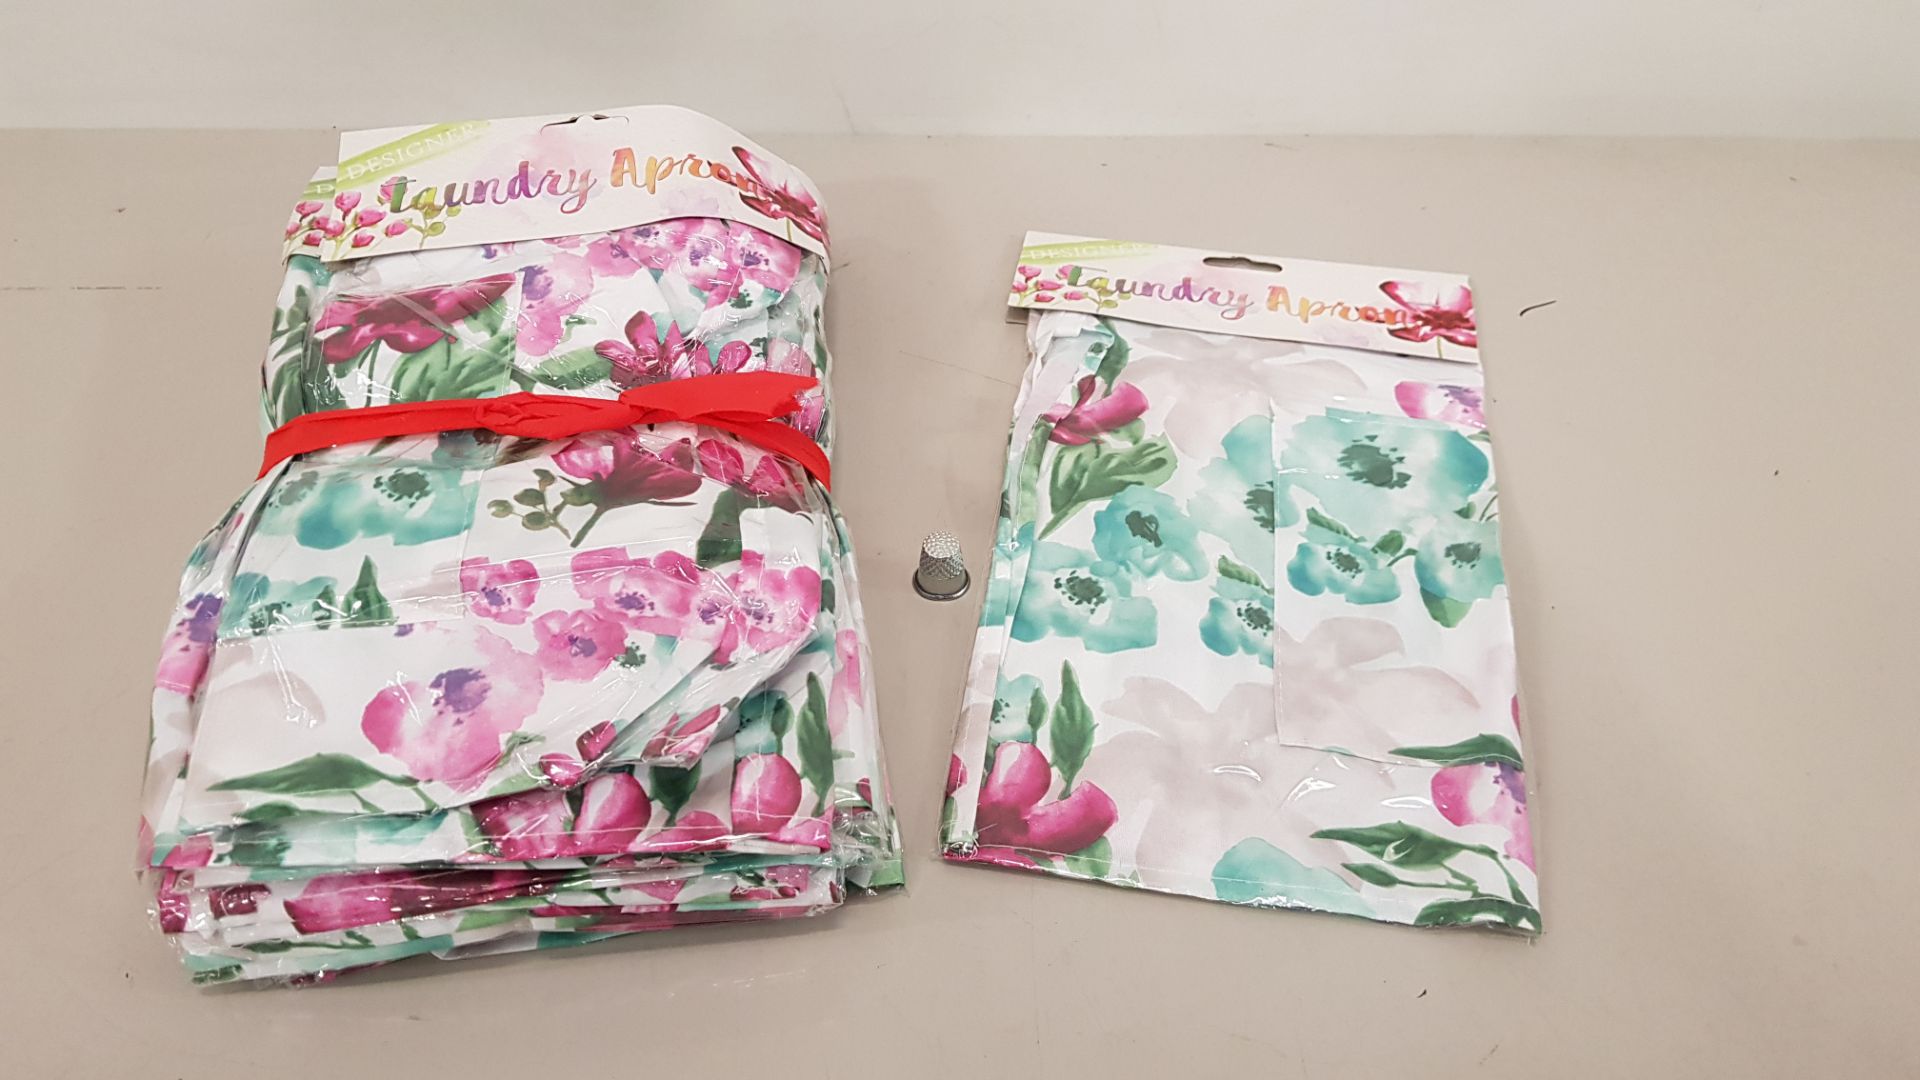 360 X BRAND NEW DESIGNER LAUNDRY APRON WITH FLOWER DETAIL IN 15 BOXES